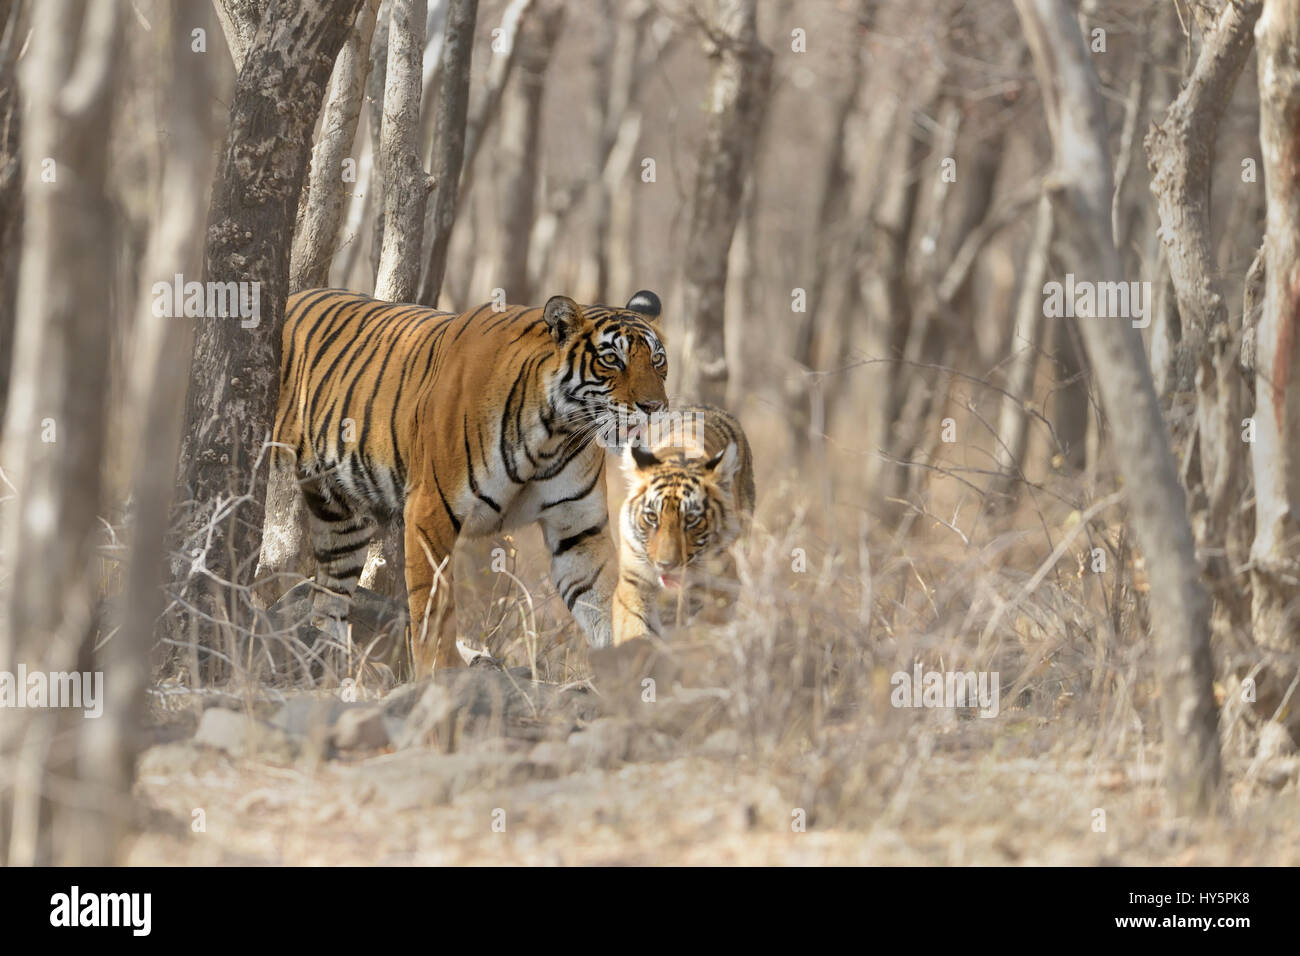 Royal Bengal tigers, mother and one small cub, walking between trees, in the dry deciduous forests of Ranthambore national park of India, in the hot s Stock Photo